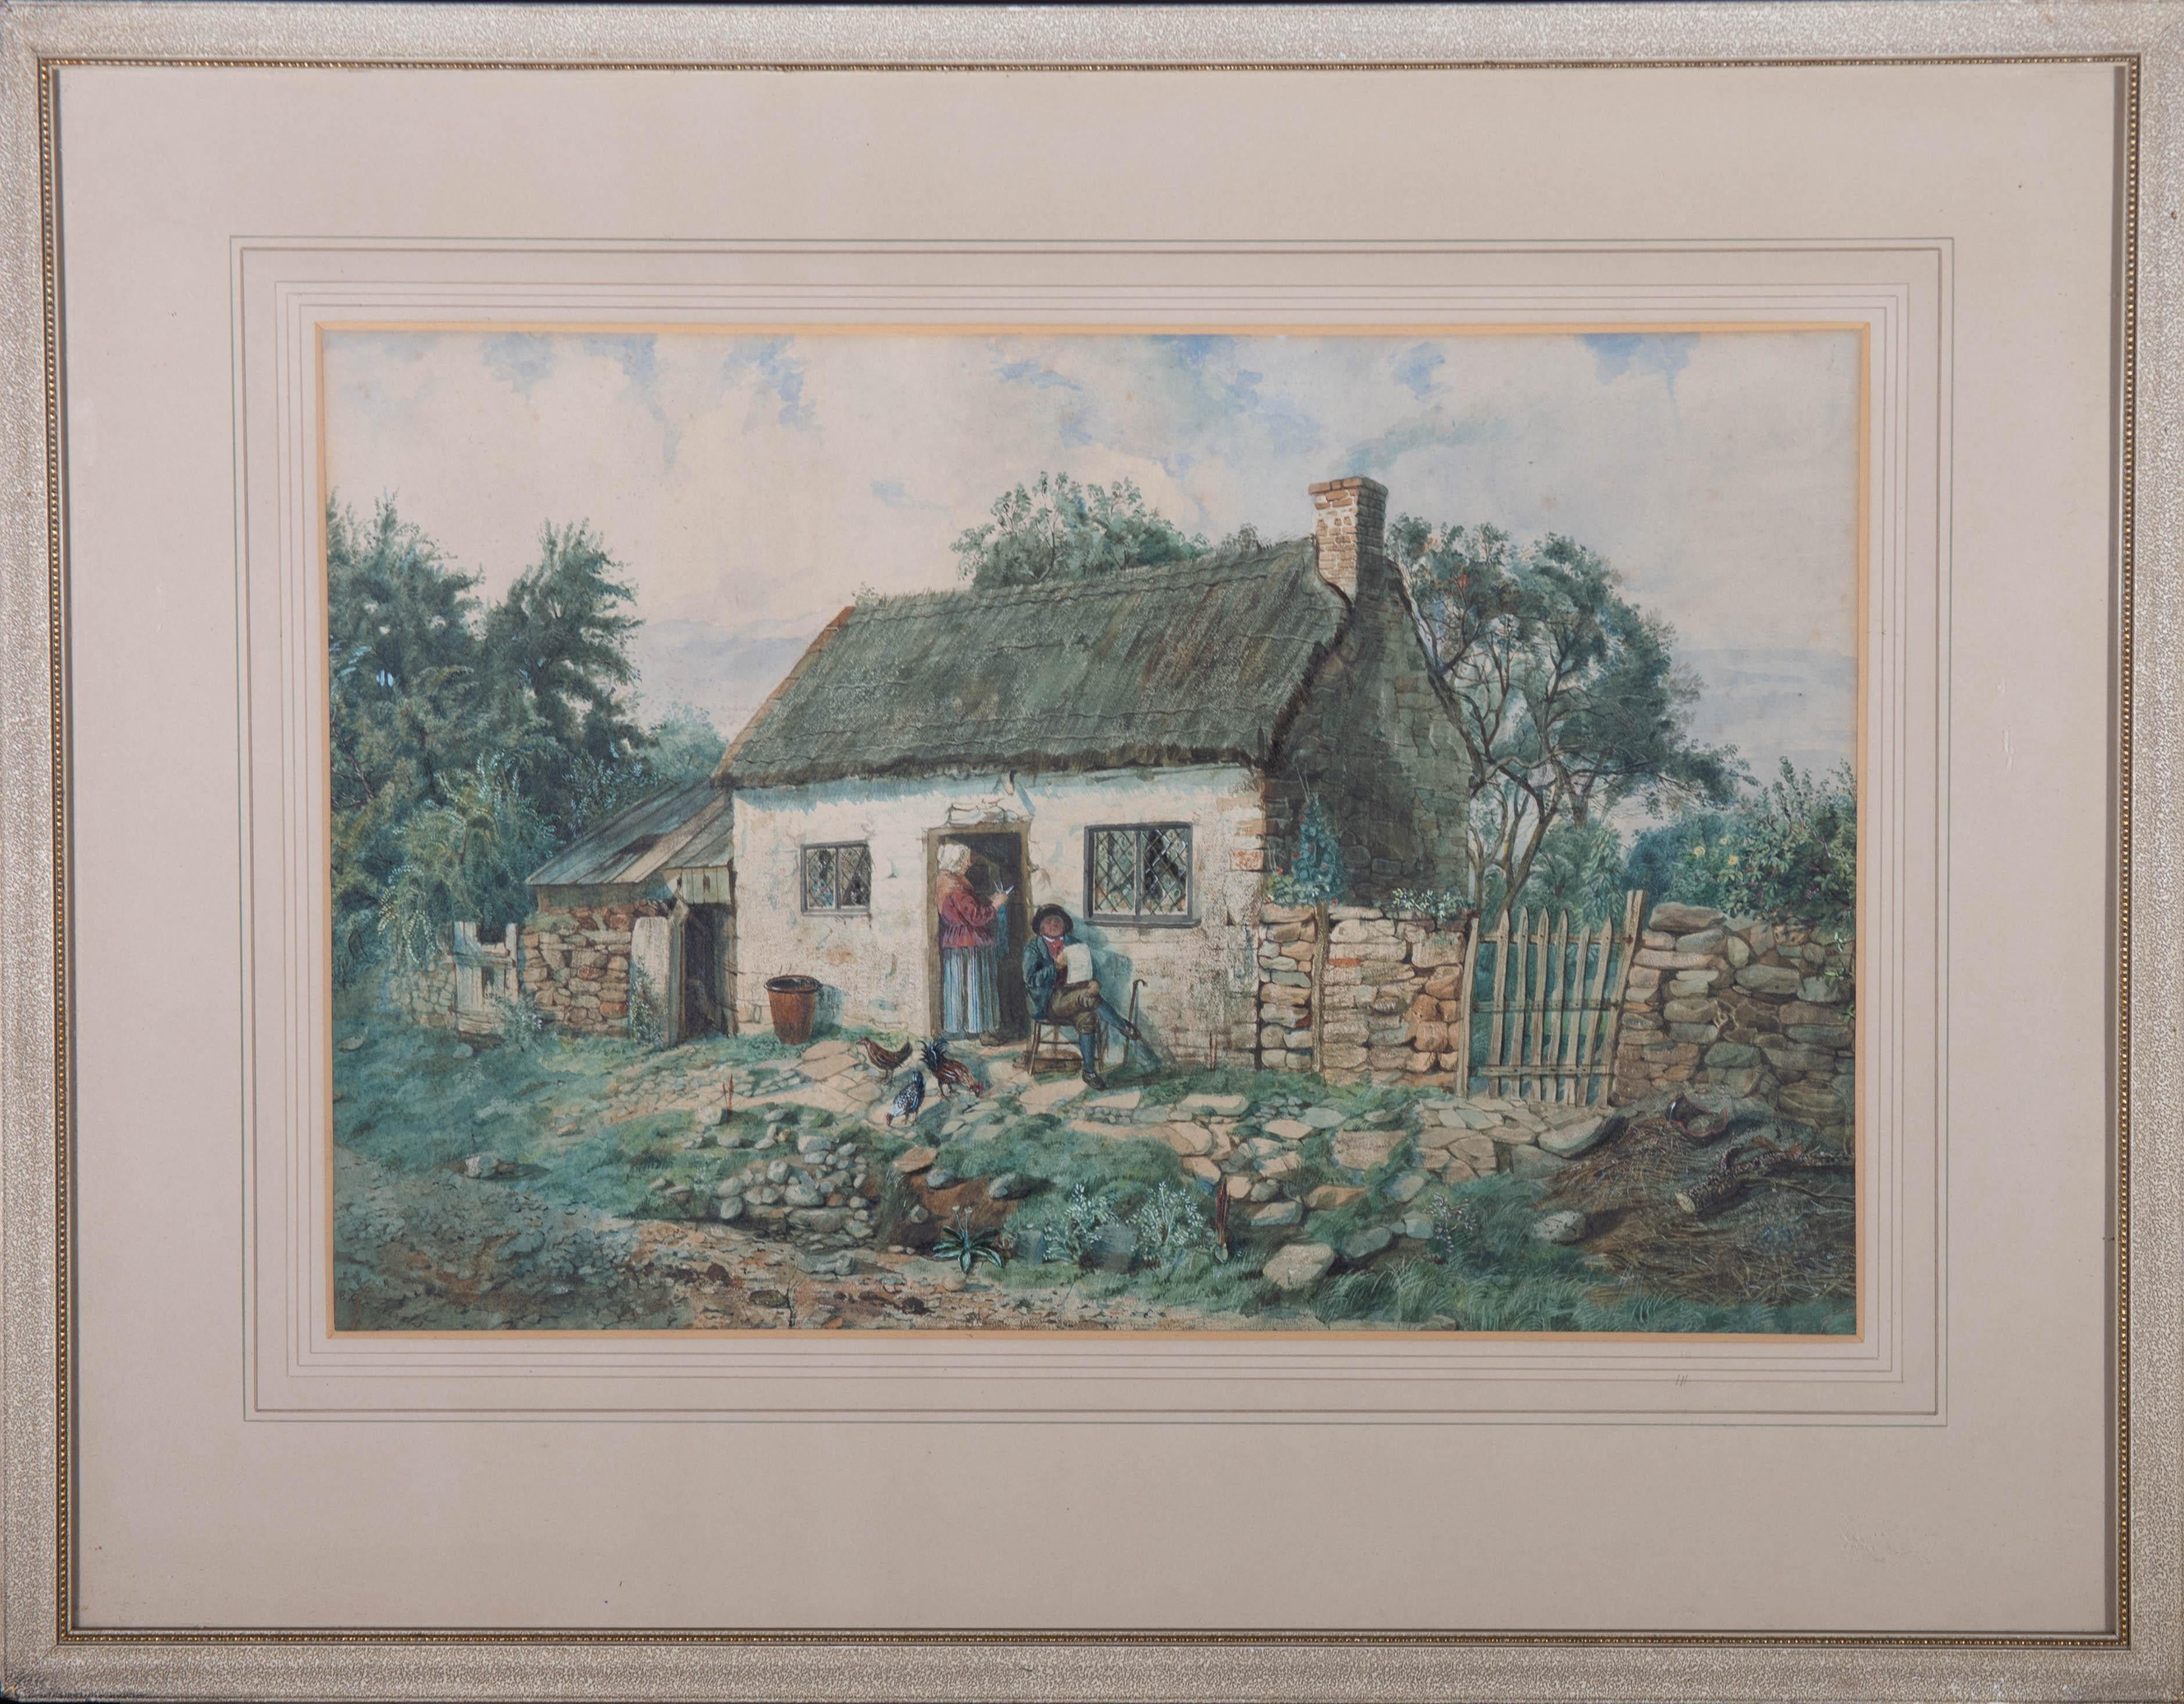 A very fine and detailed watercolour painting with gouache details, depicting a rural landscape scene with a cottage, two figures and chickens nearby. Signed to the lower left-hand corner. Presented in washline card mount and in an off-white frame